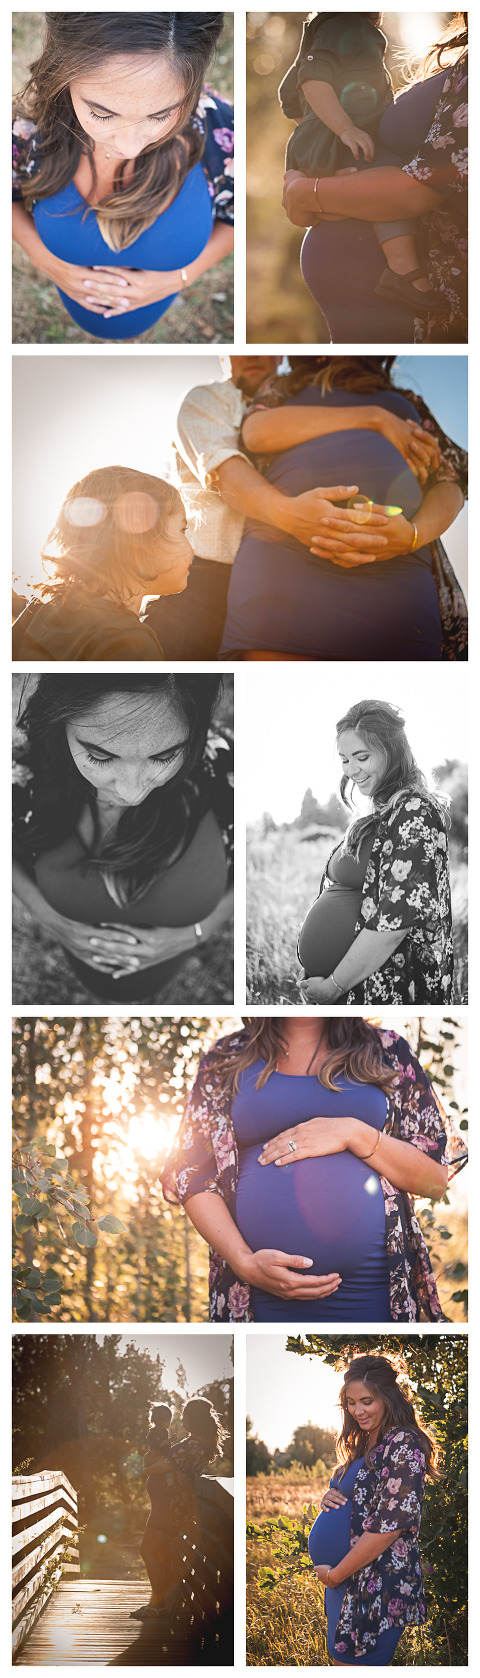 Rachel's baby bump, Lifestyle Maternity & family Session by Hailey Haberman in Ellensburg WA